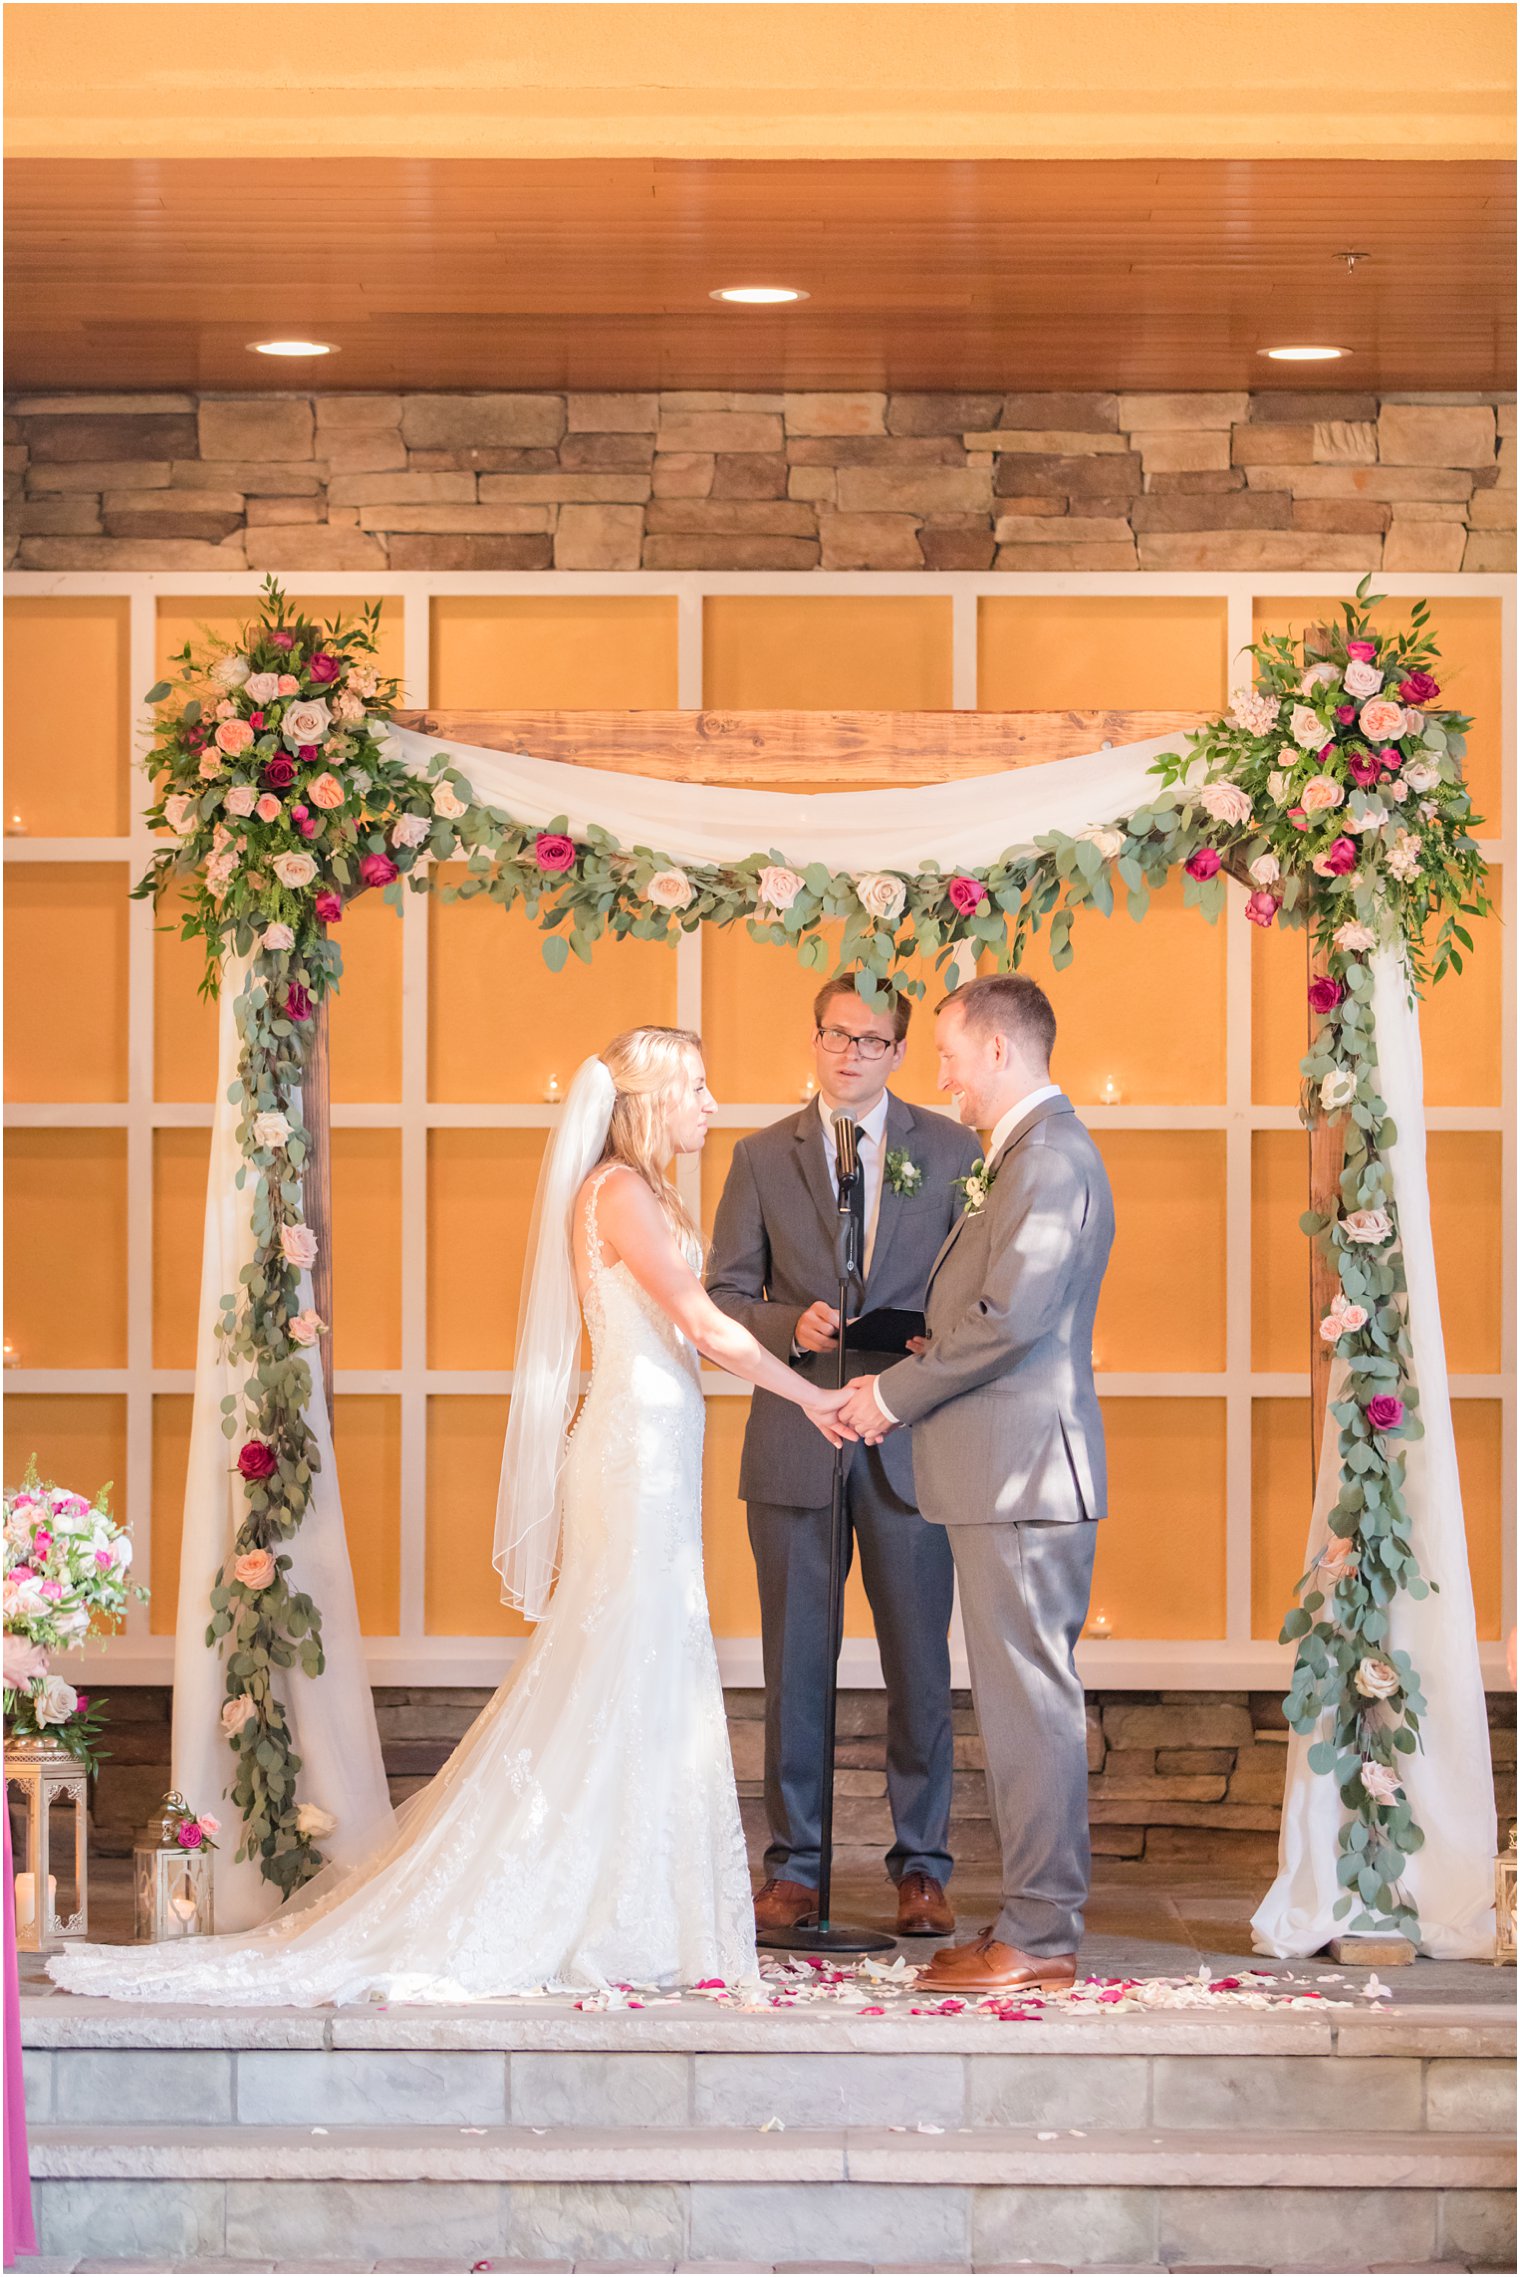 Wedding ceremony at Stone House at Stirling Ridge in Warren, NJ